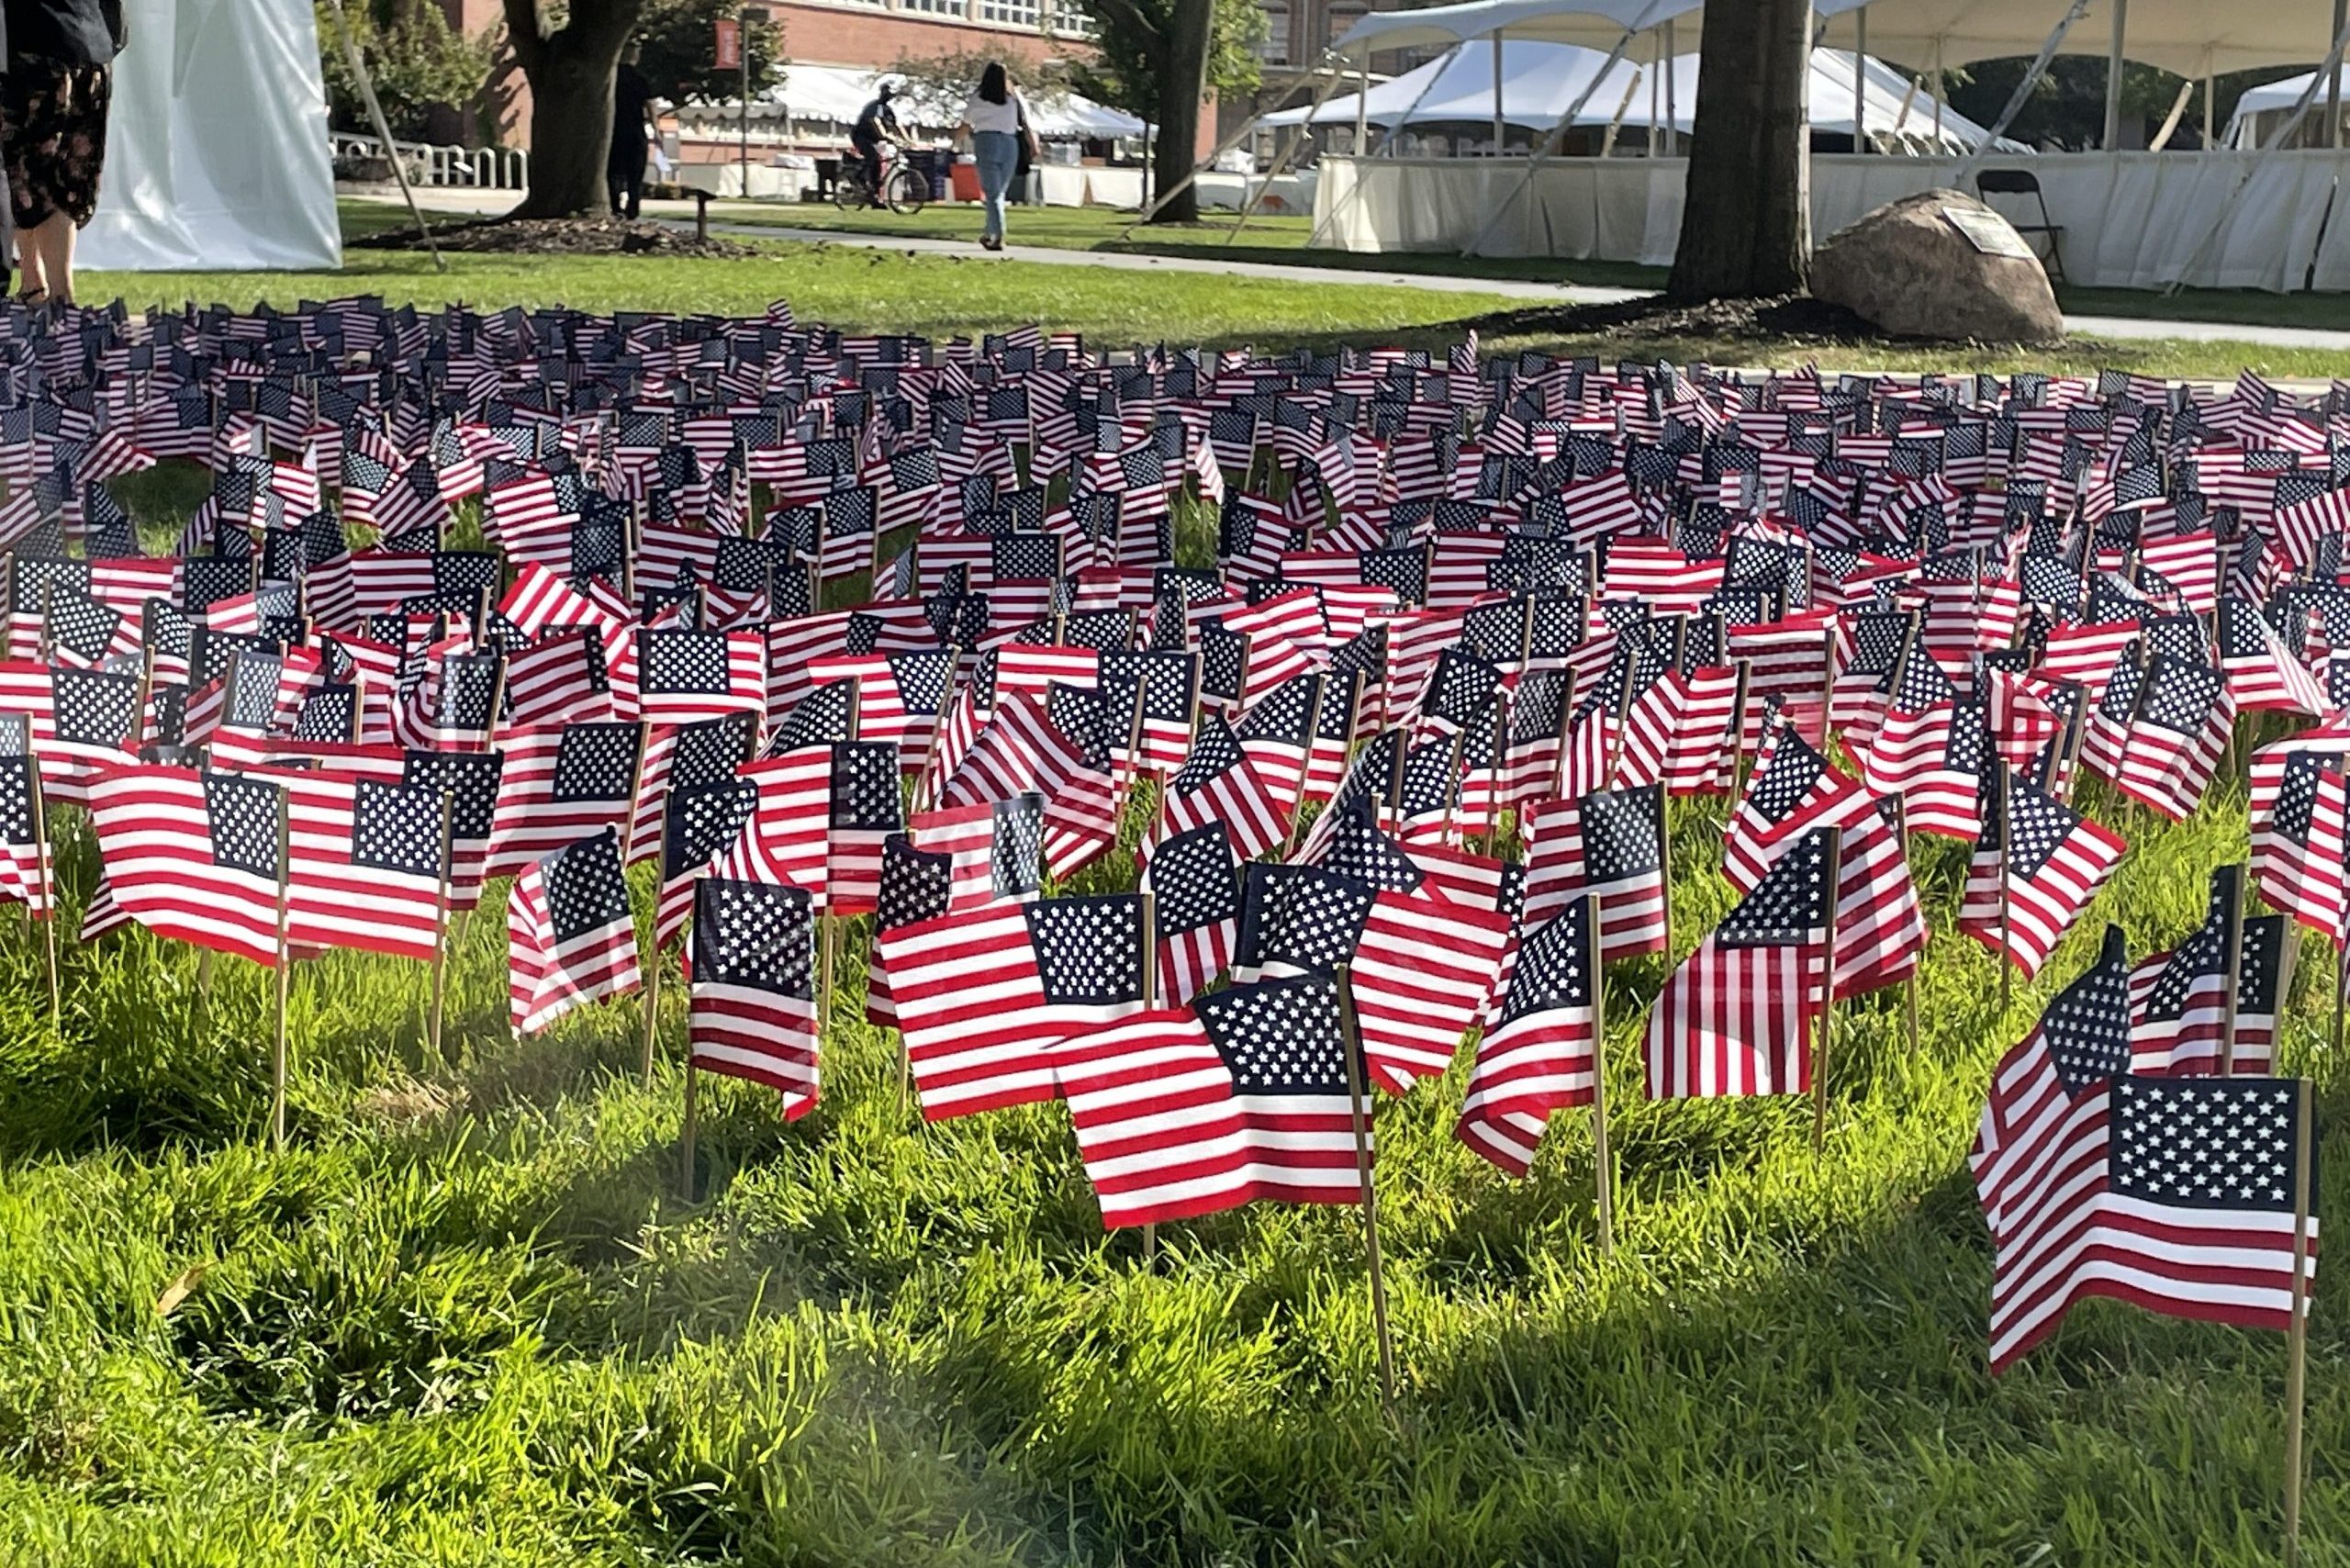 A flag garden stands outside Hendricks Chapel to honor the lives lost in the 9/11 attacks